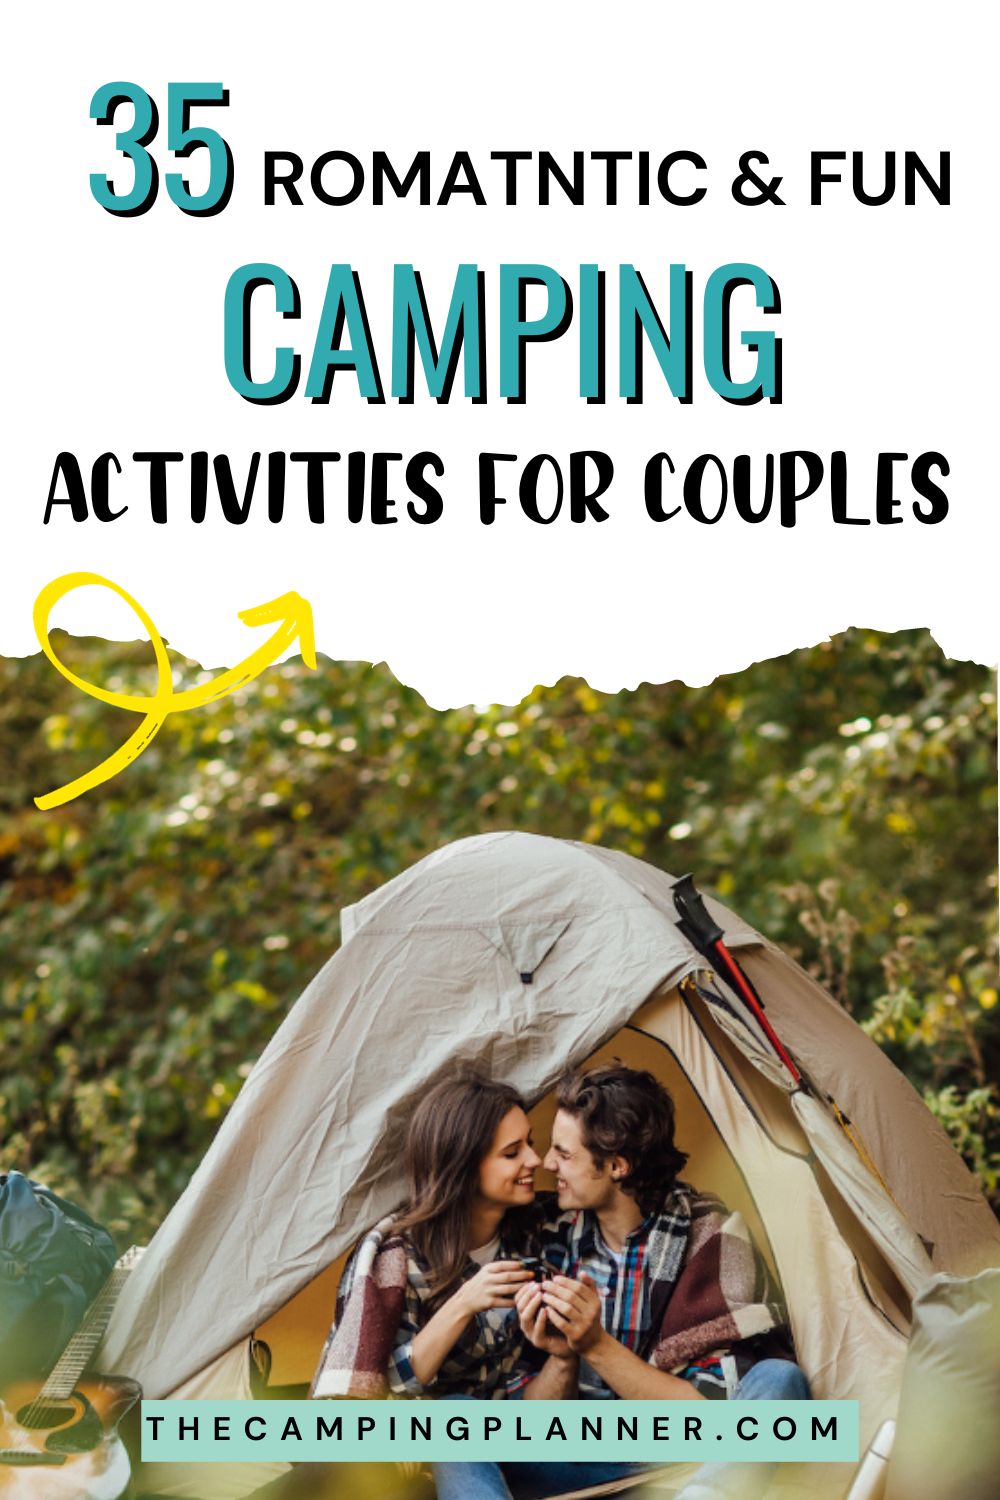 27 Incredibly Fun Camping Games for Couples - Amateur Adventure Journal